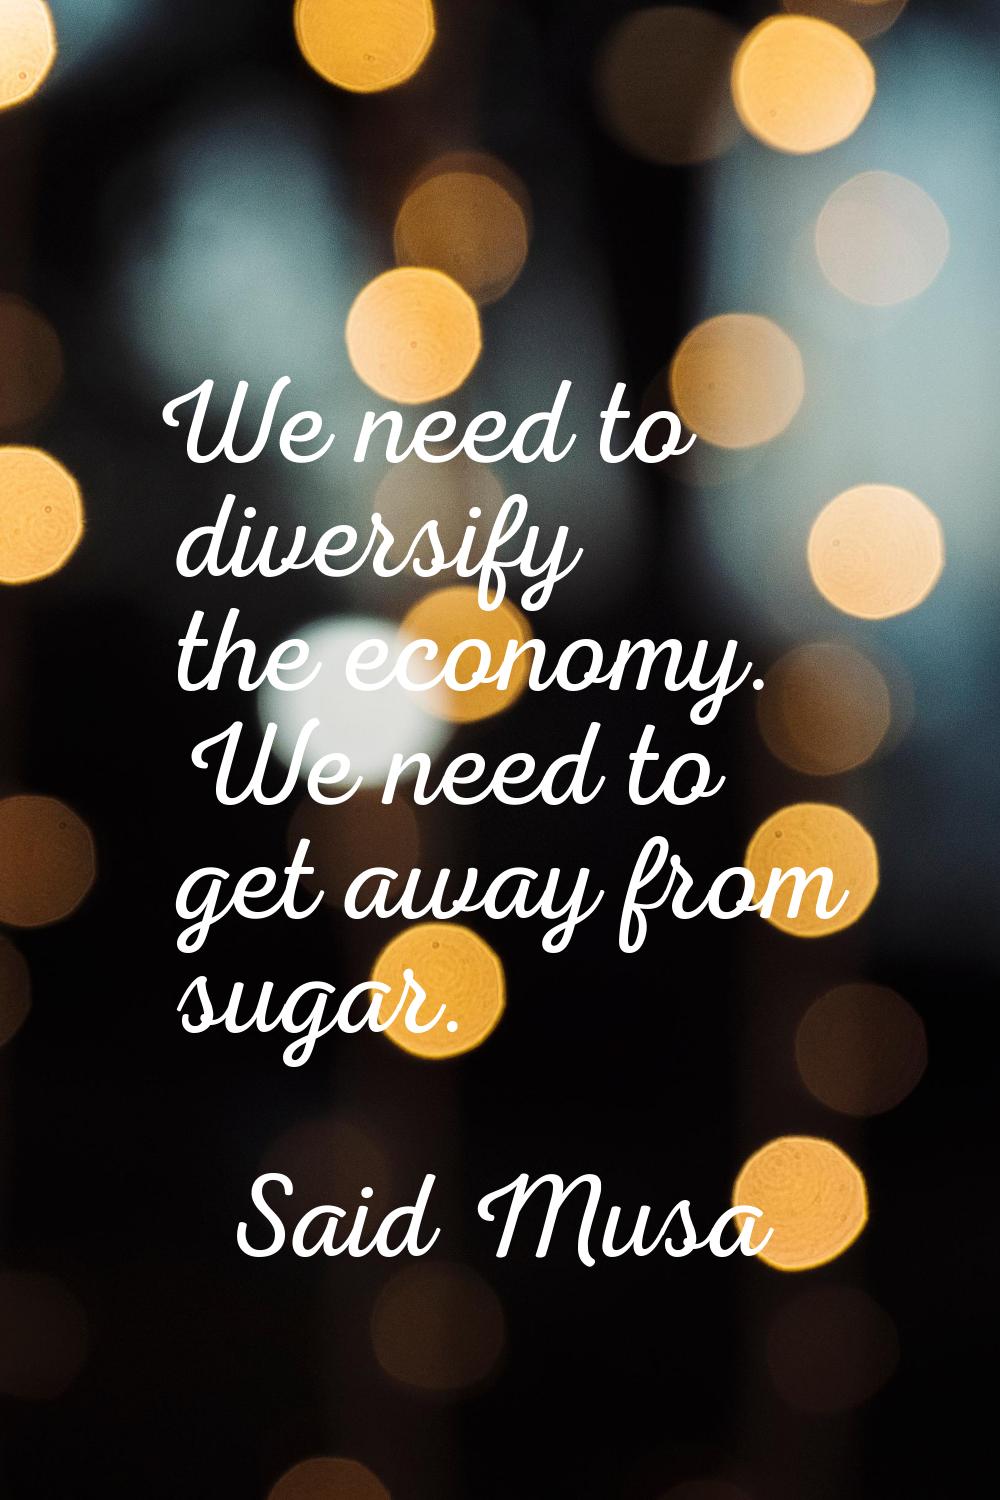 We need to diversify the economy. We need to get away from sugar.